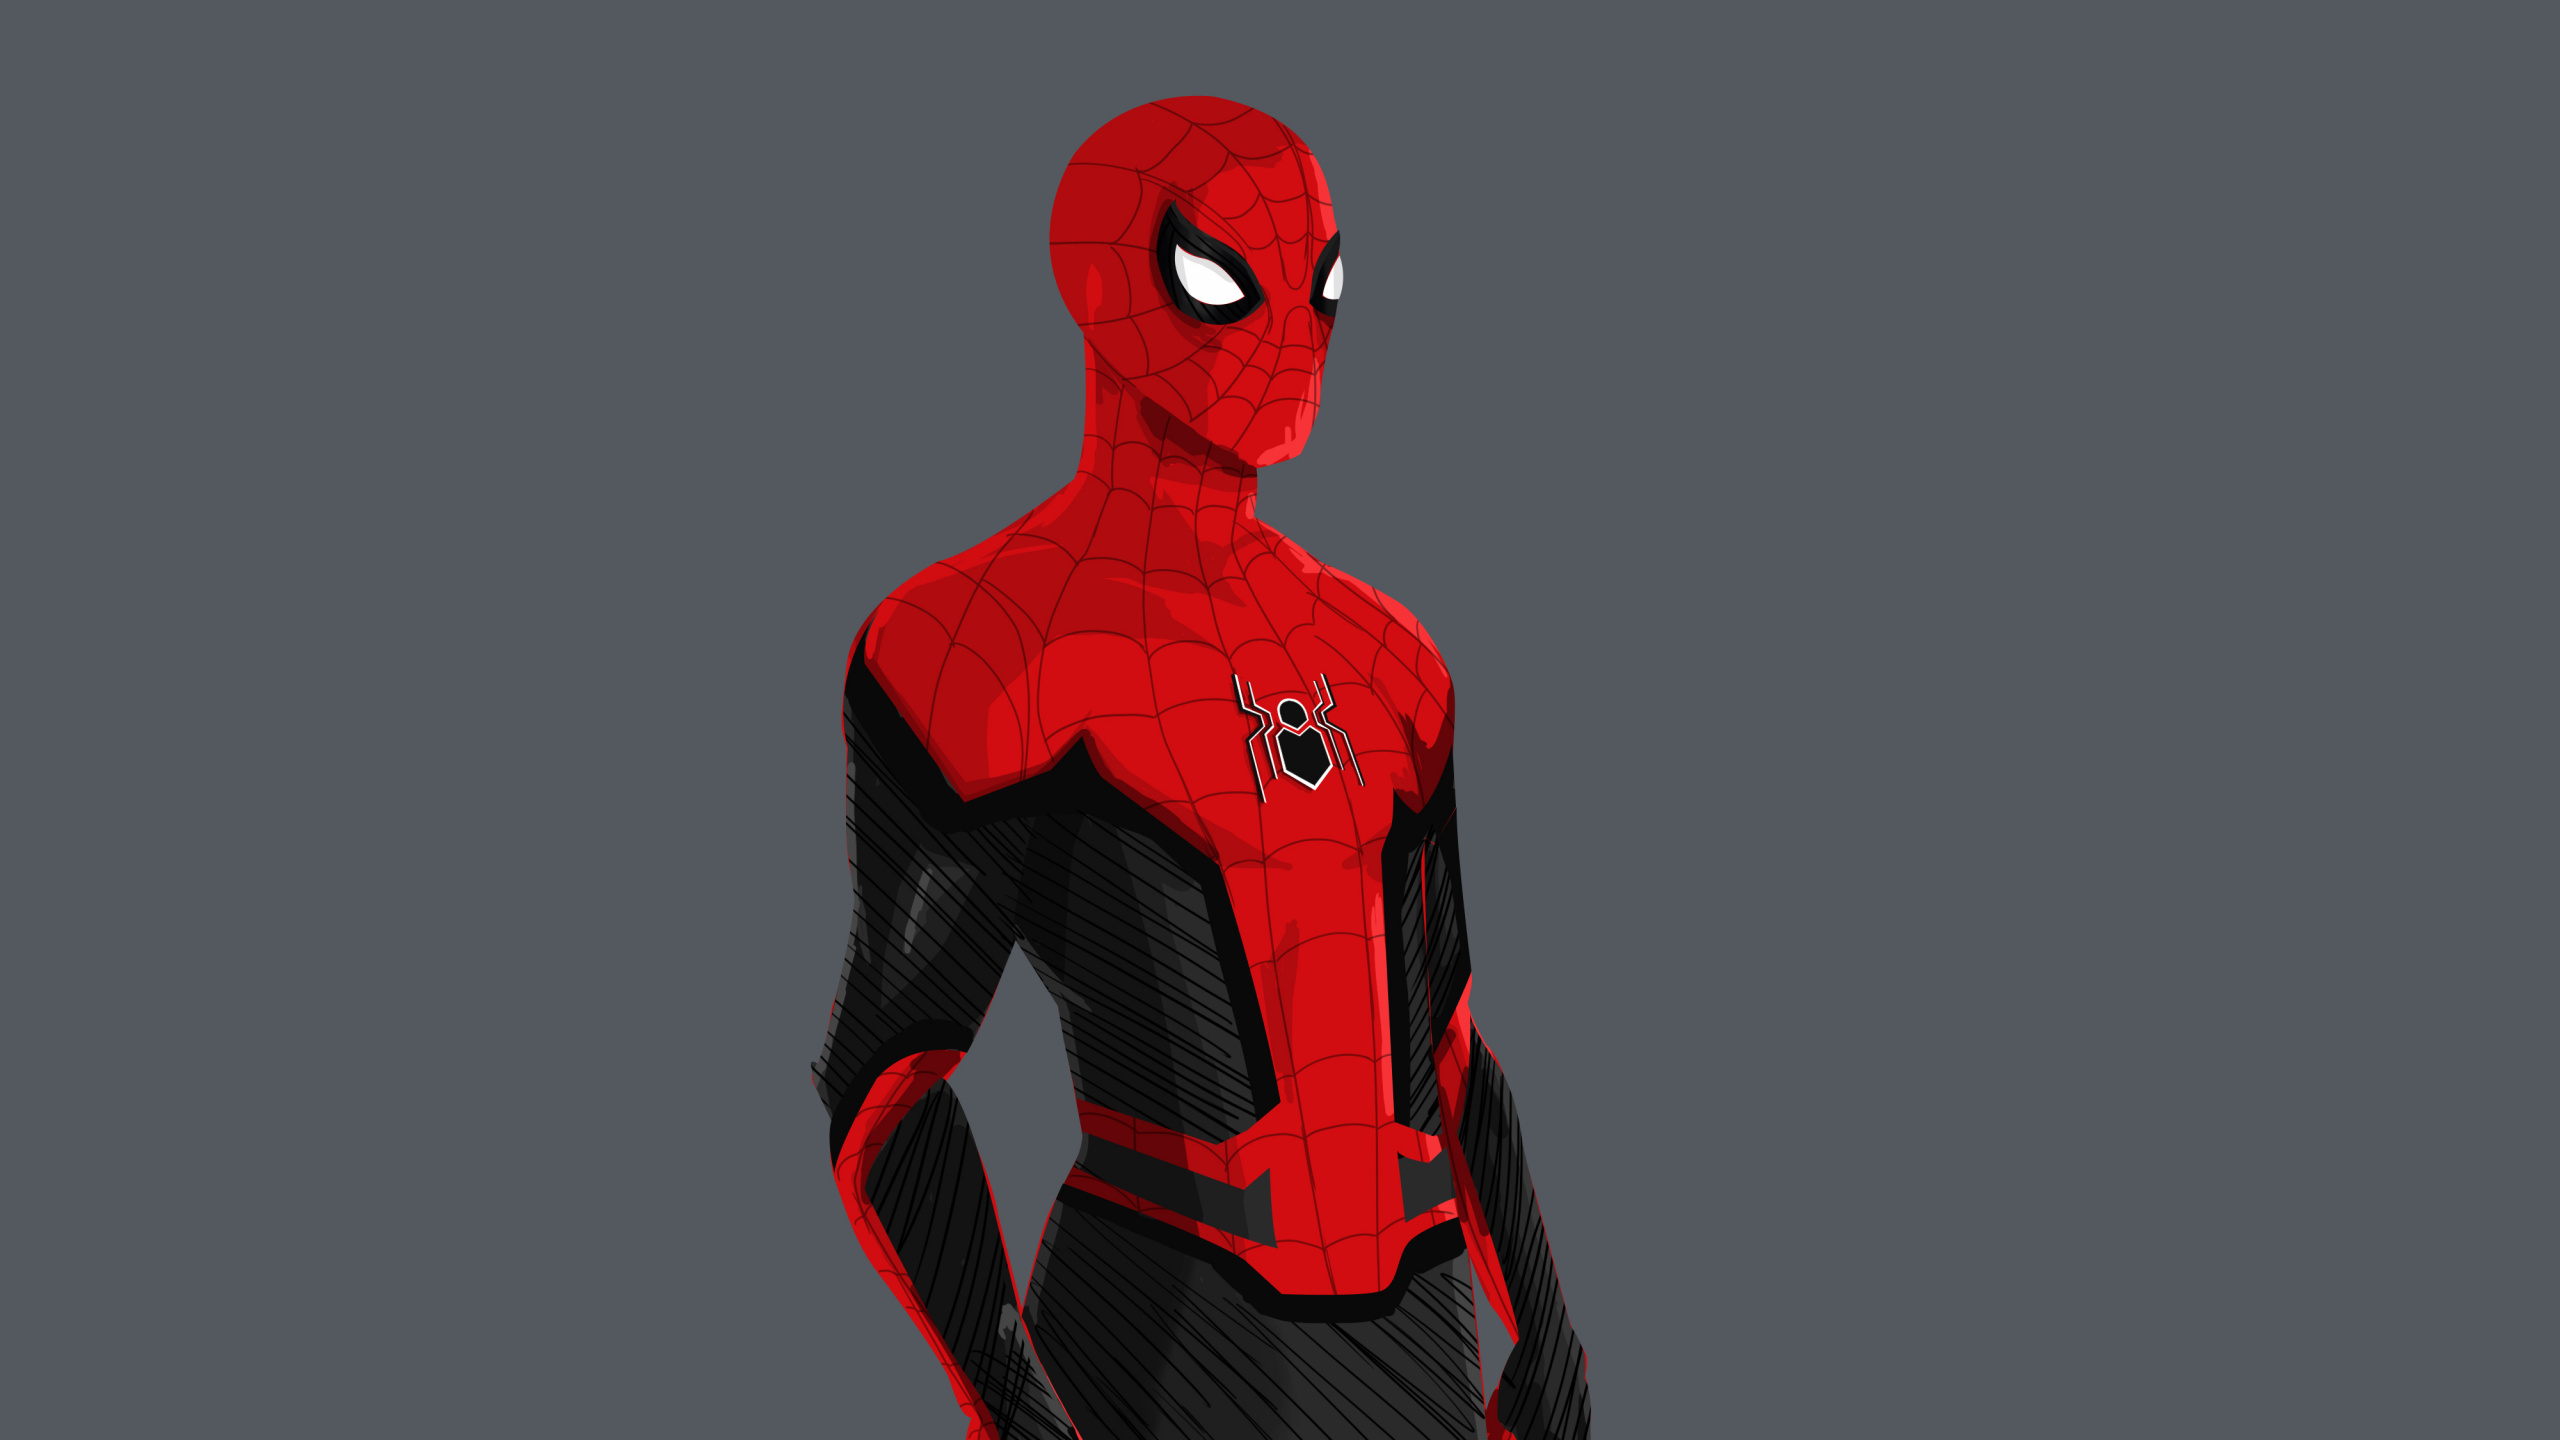 Red and Black Spider Man Illustration. Wallpaper in 2560x1440 Resolution